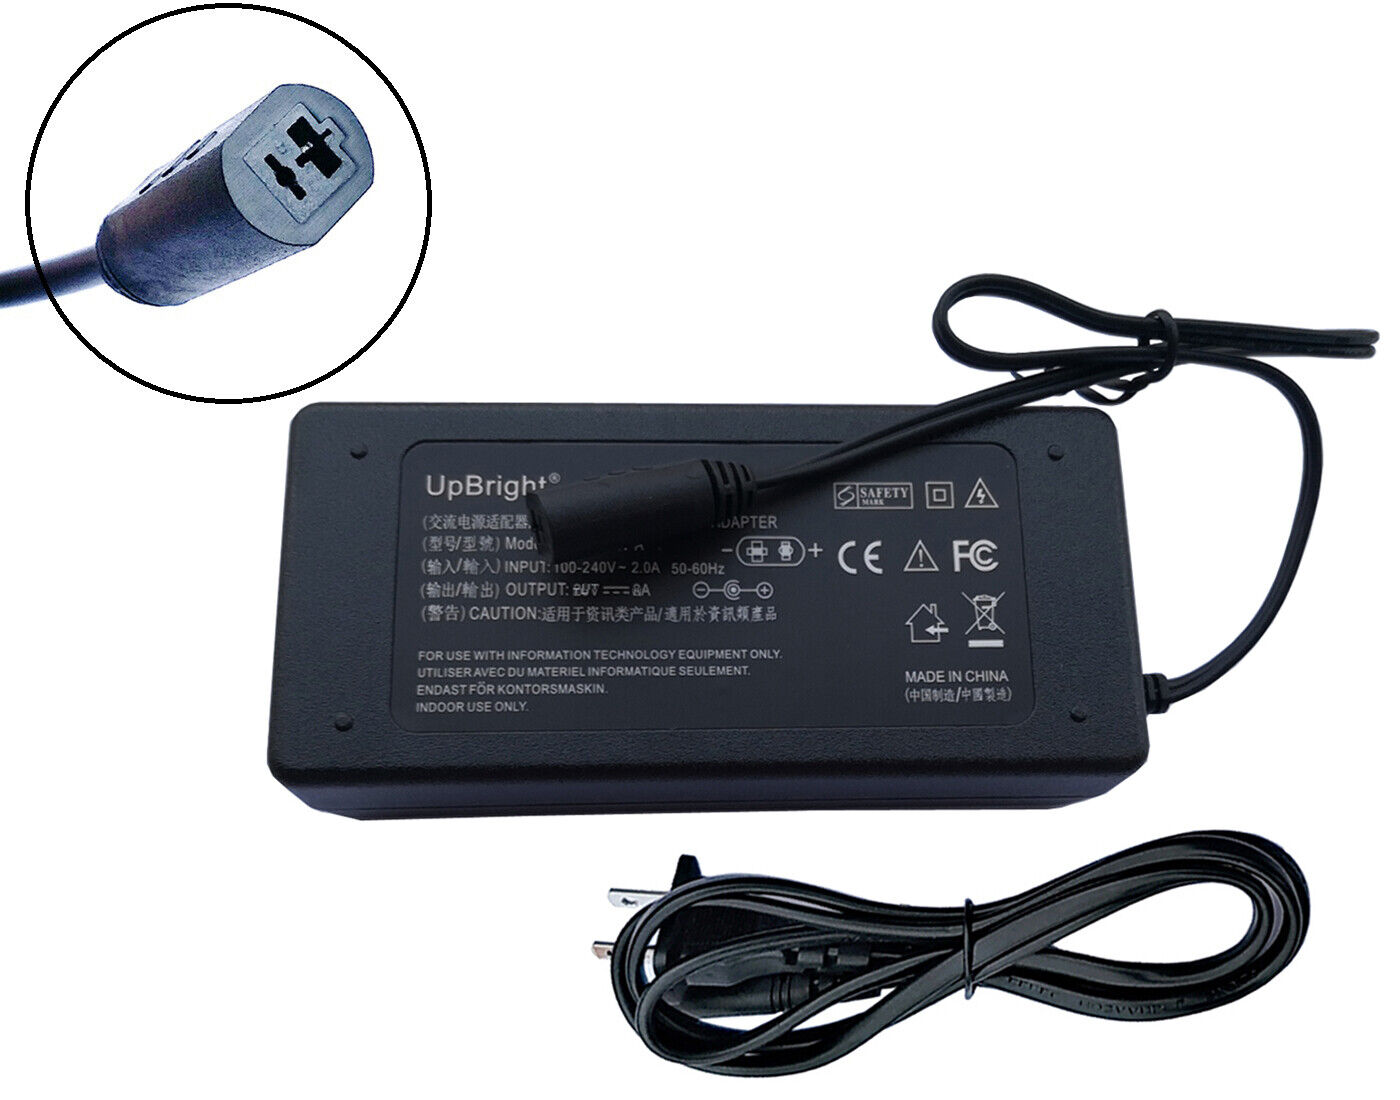 2-Prong AC / DC Adapter For Lift Chair Kit Model No: PSK2918A HHC Changzhou Corp